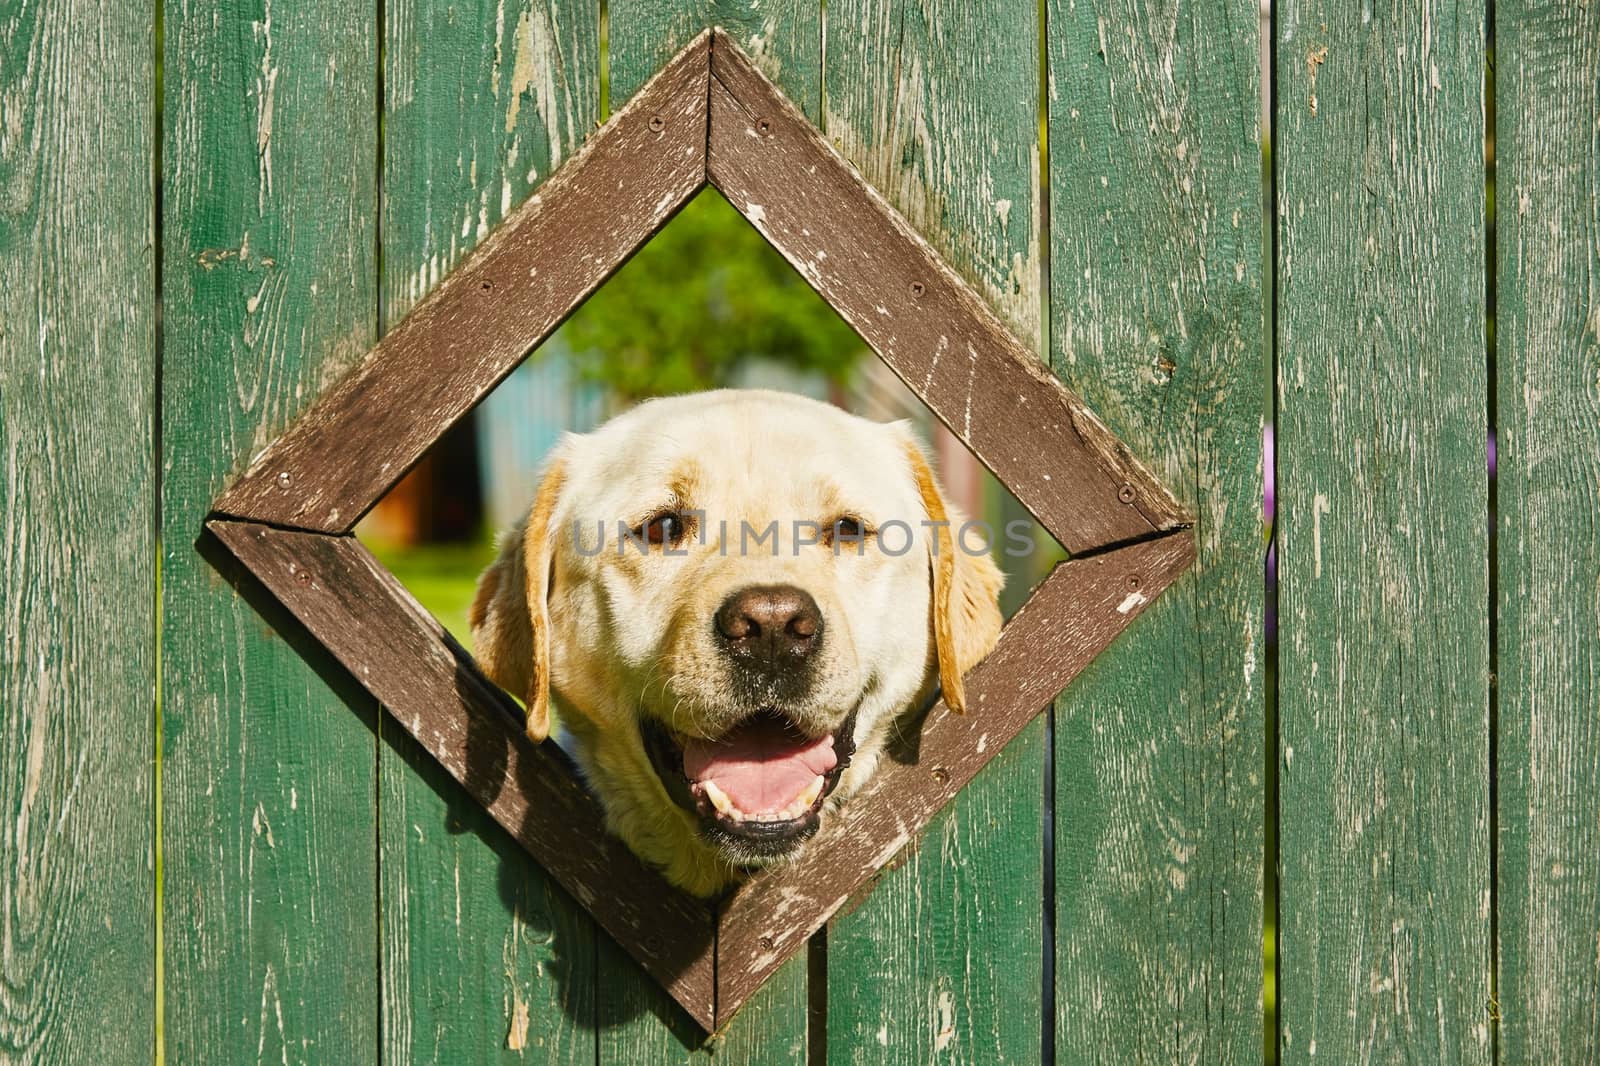 Curious dog is looking from window in wooden fence